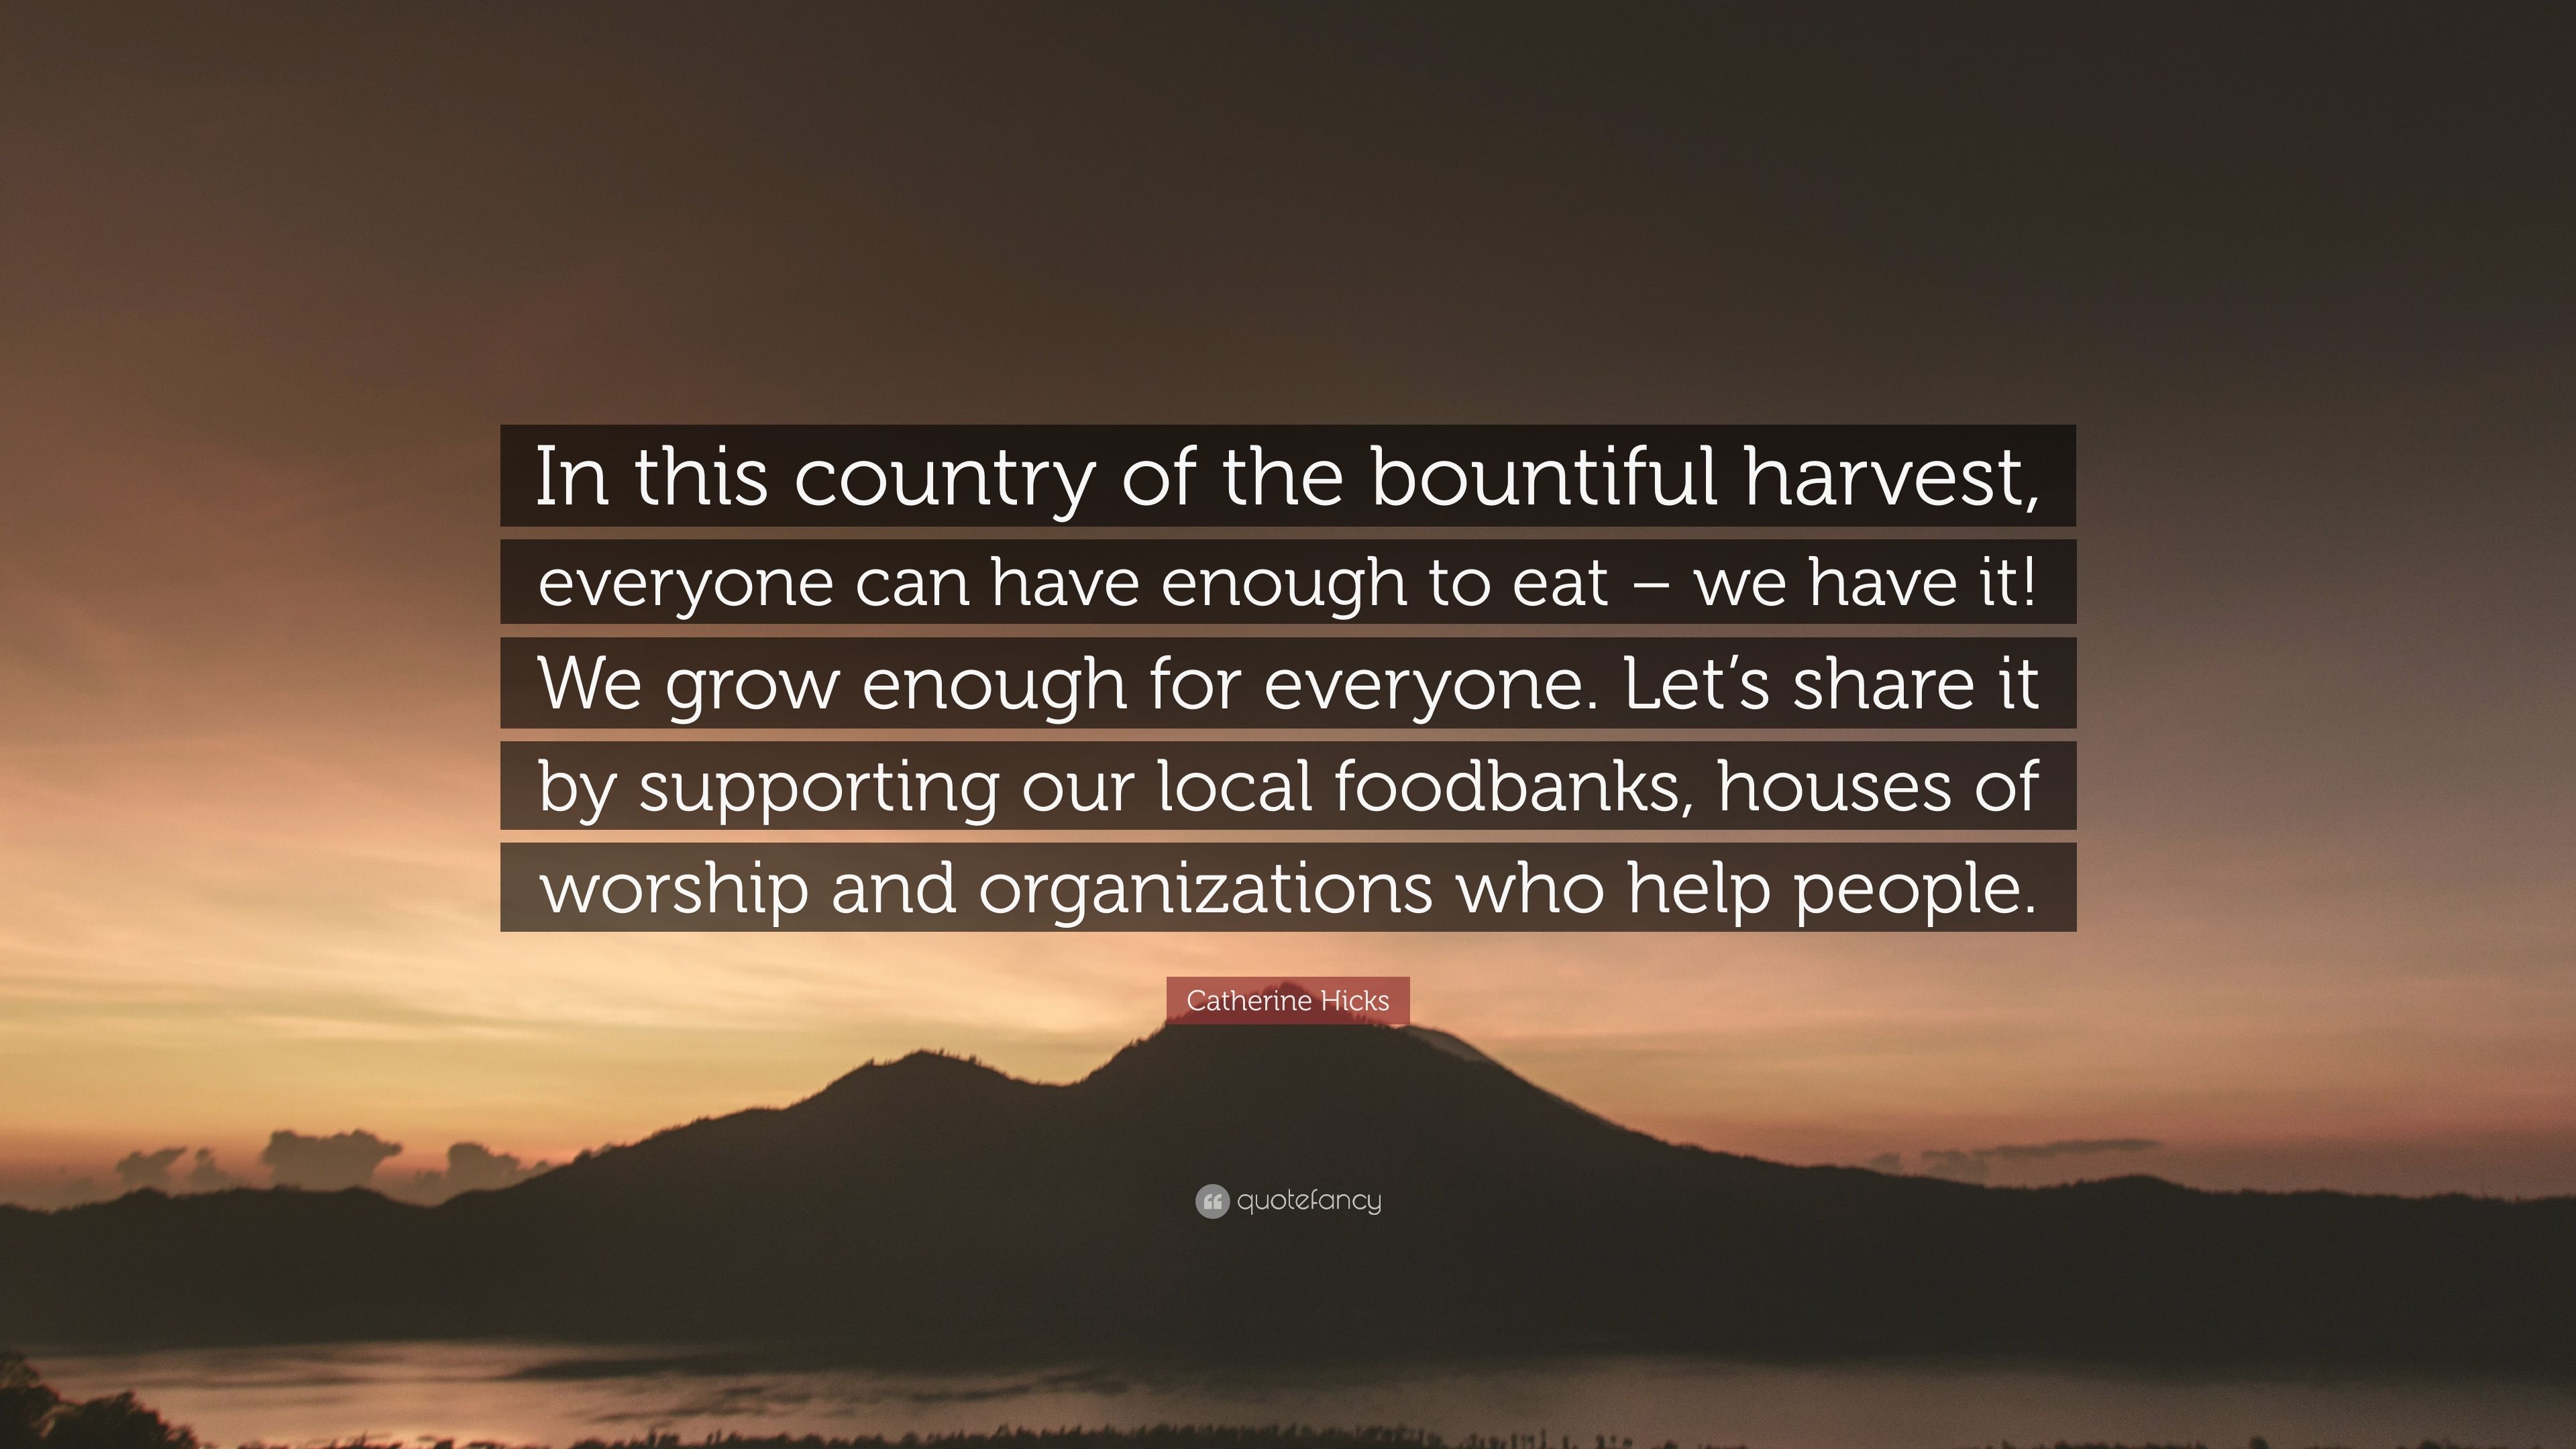 Catherine Hicks Quote: “In this country of the bountiful harvest